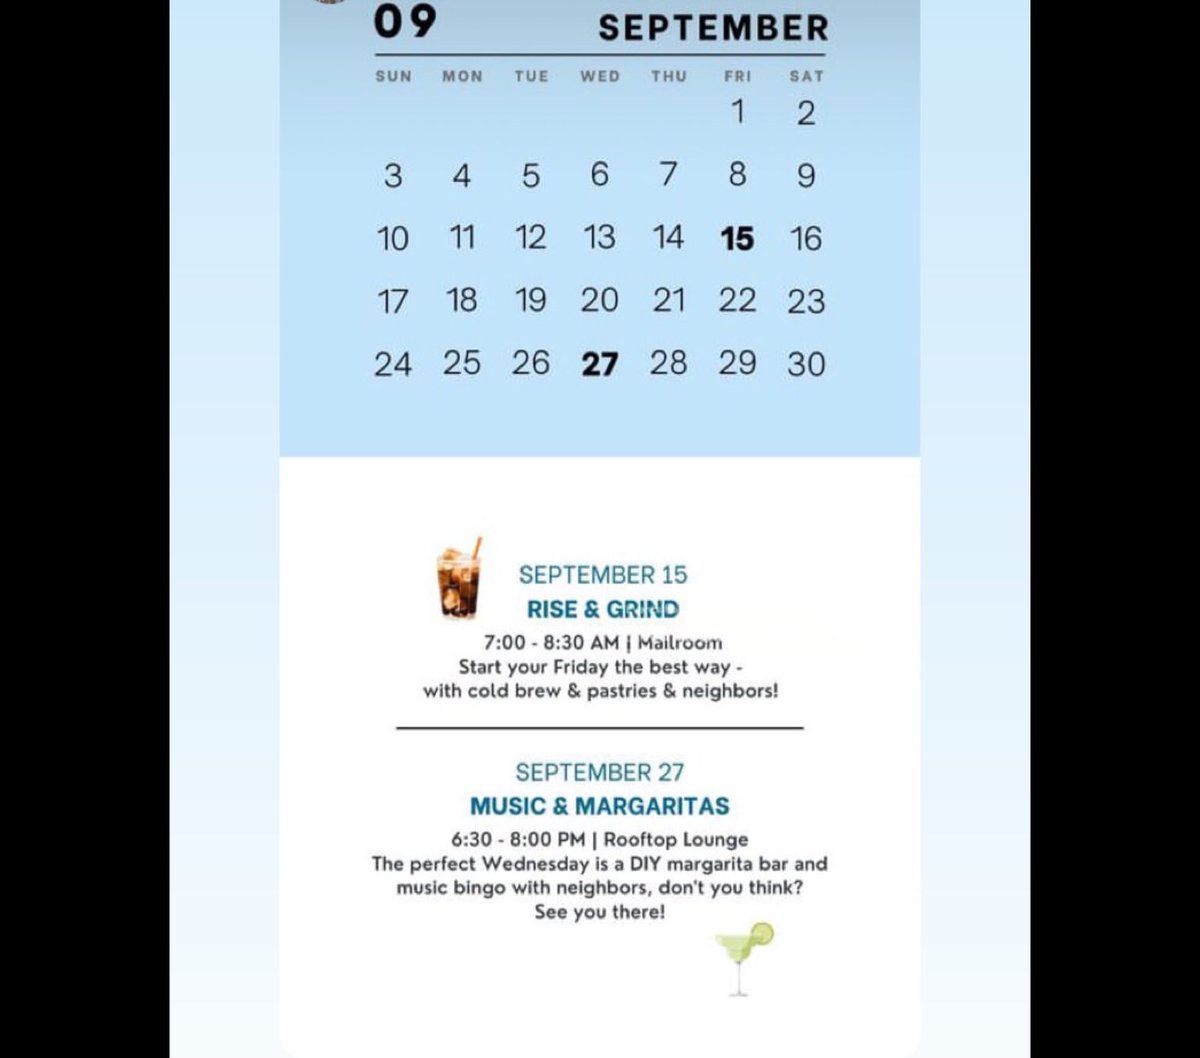 Check out @lincolndilworth_aptlife September events 👀 Starting off with Rise & Grind this Friday 9/15 7-8:30 am in mail room. Enjoy cold brew & pastries with neighbors! 🥮 ☕️ 
#apartmentlife #lincolnatdilworth #lincolnpropco #coffee #pastry #events